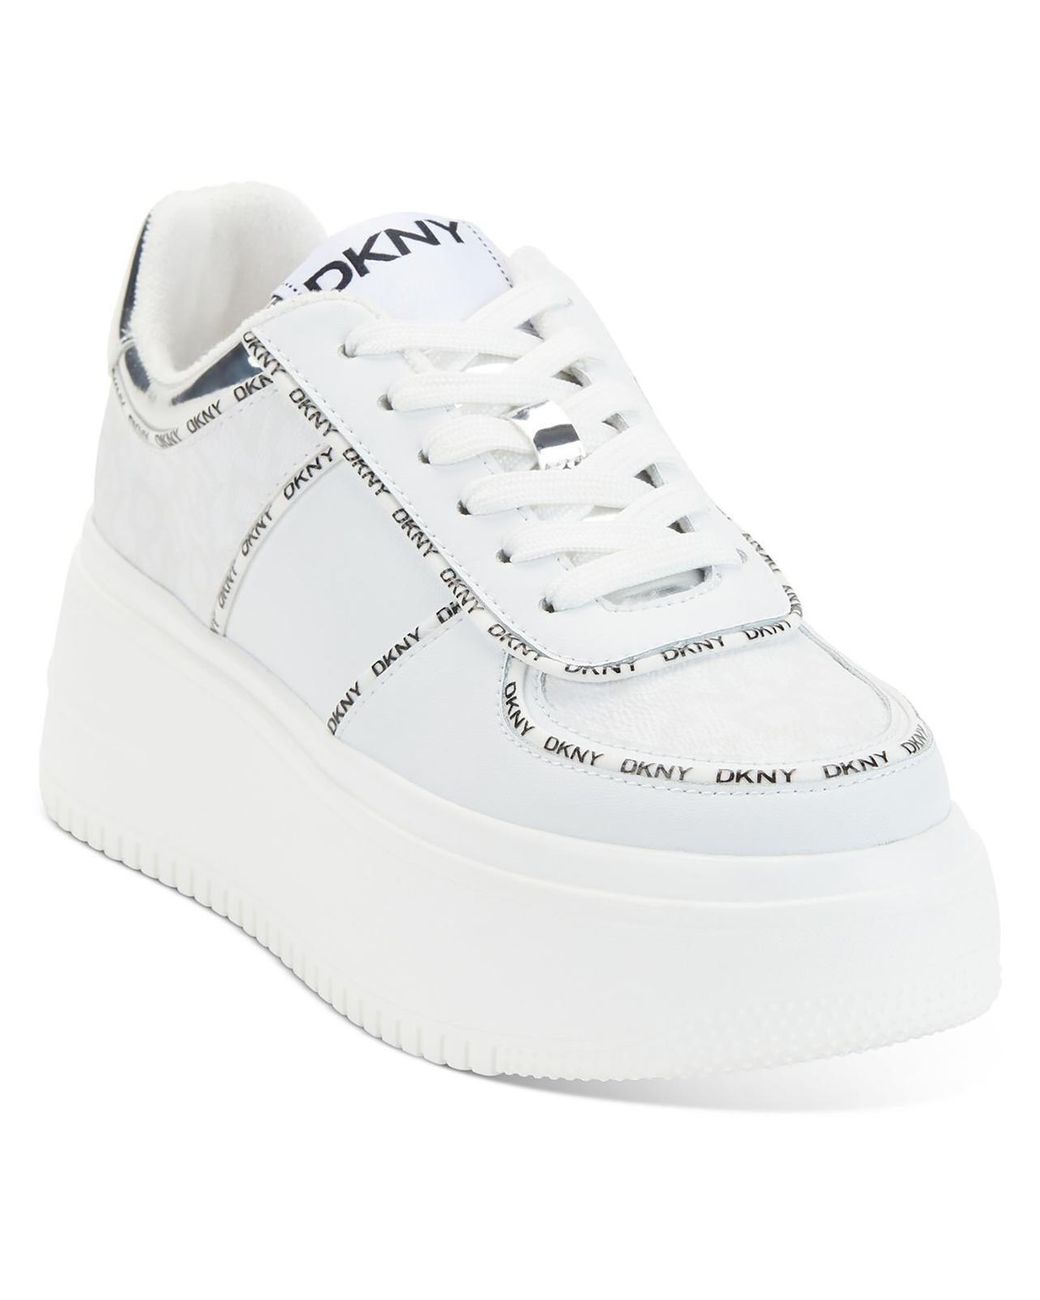 DKNY Maia Faux Leather Chunky Casual And Fashion Sneakers in White | Lyst